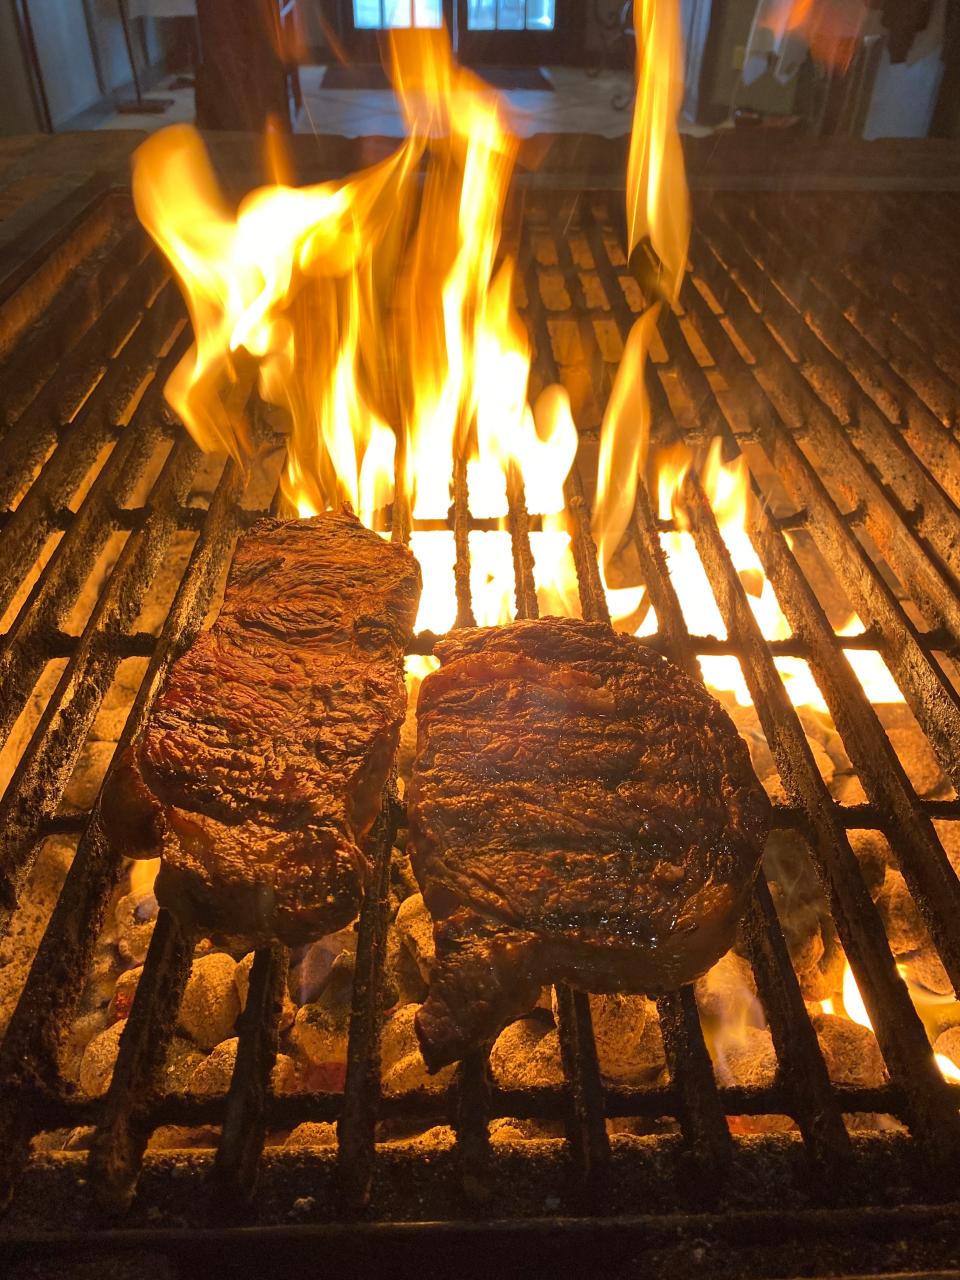 Steaks on the grill at The Butcher Shop in Cordova, TN. The restaurant known for its exhibition cooking celebrates its 40th anniversary in 2021.